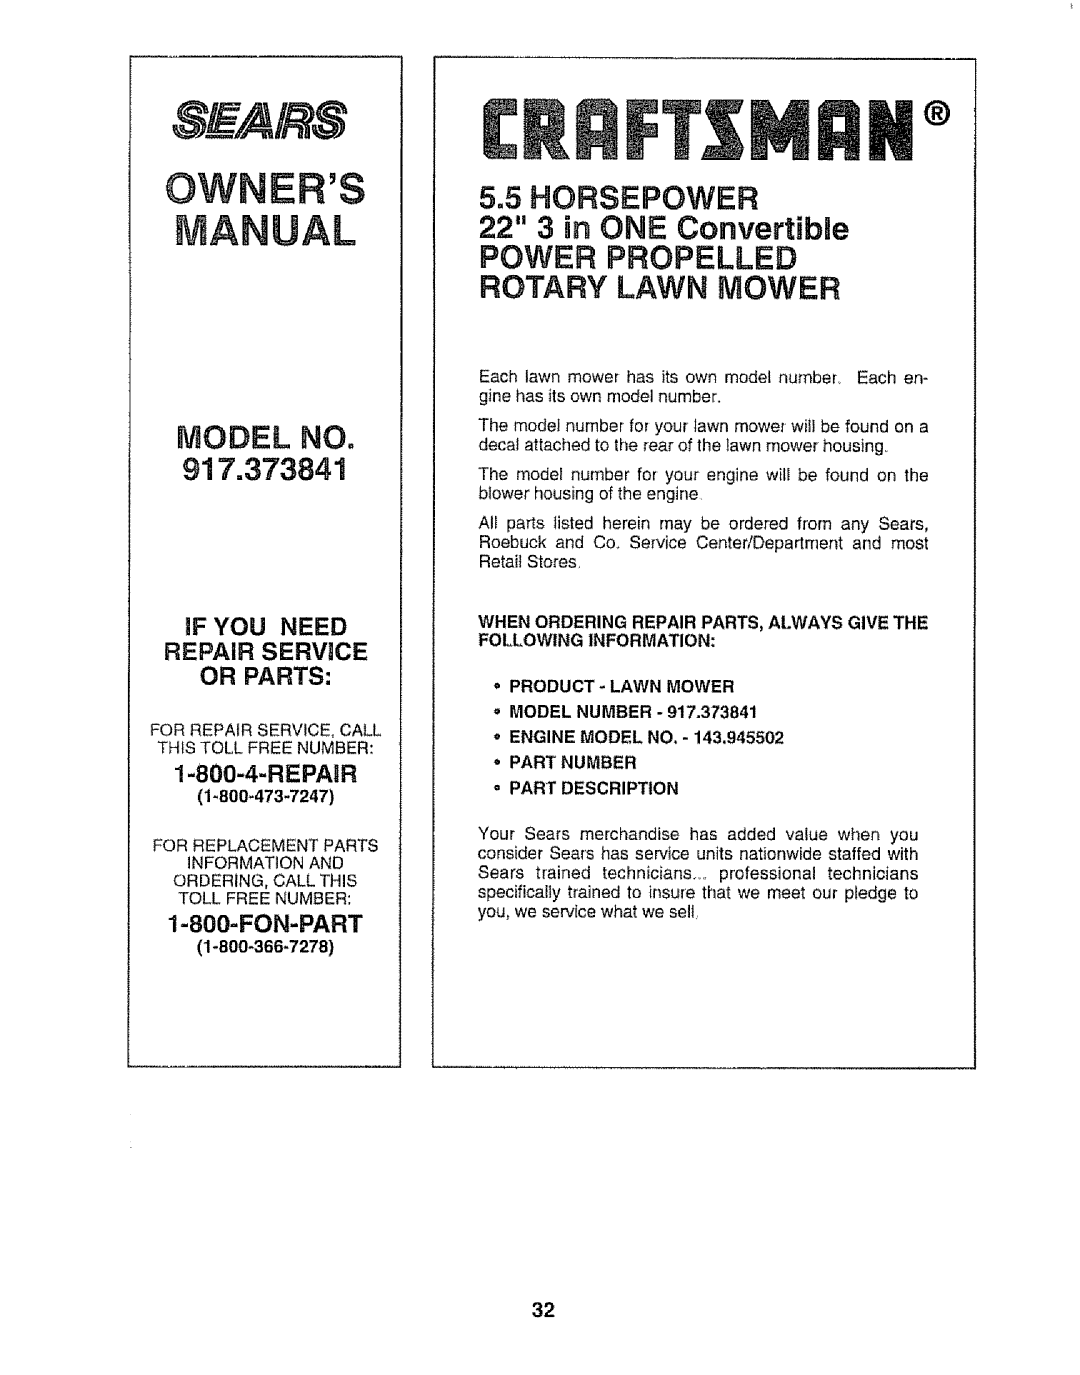 Craftsman 917.373841 owner manual Model No, HORSEPOWER 22 3 in ONE Convertible, Power Propelled Rotary Lawn Mower 